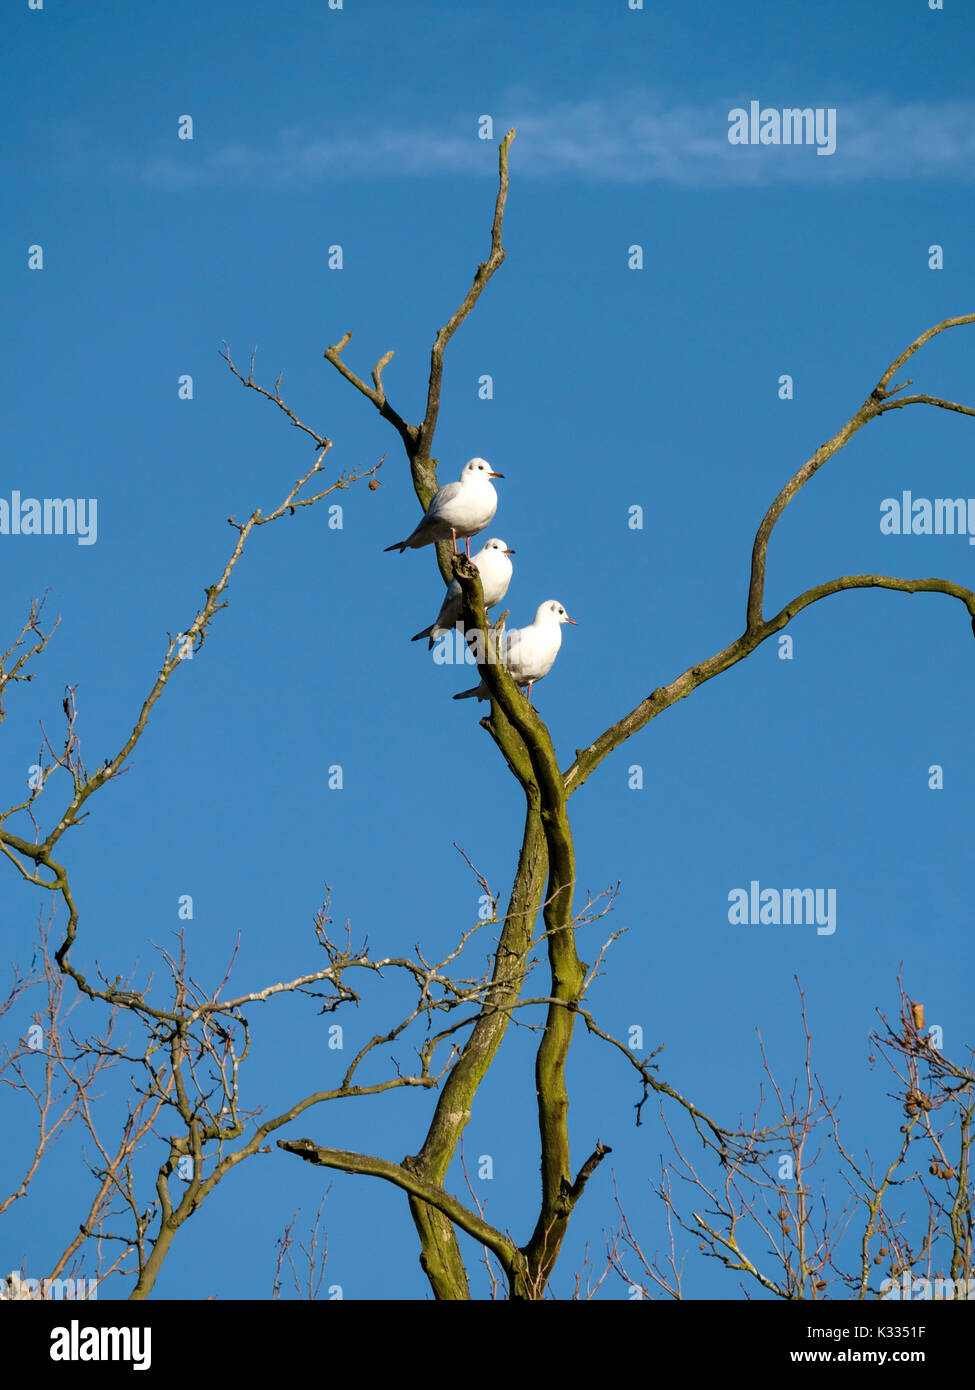 Row of three adult black-headed gulls (Chroicocephalus ridibundus) in winter plumage perched on tree branch with blue sky in background, Derbyshire,UK Stock Photo